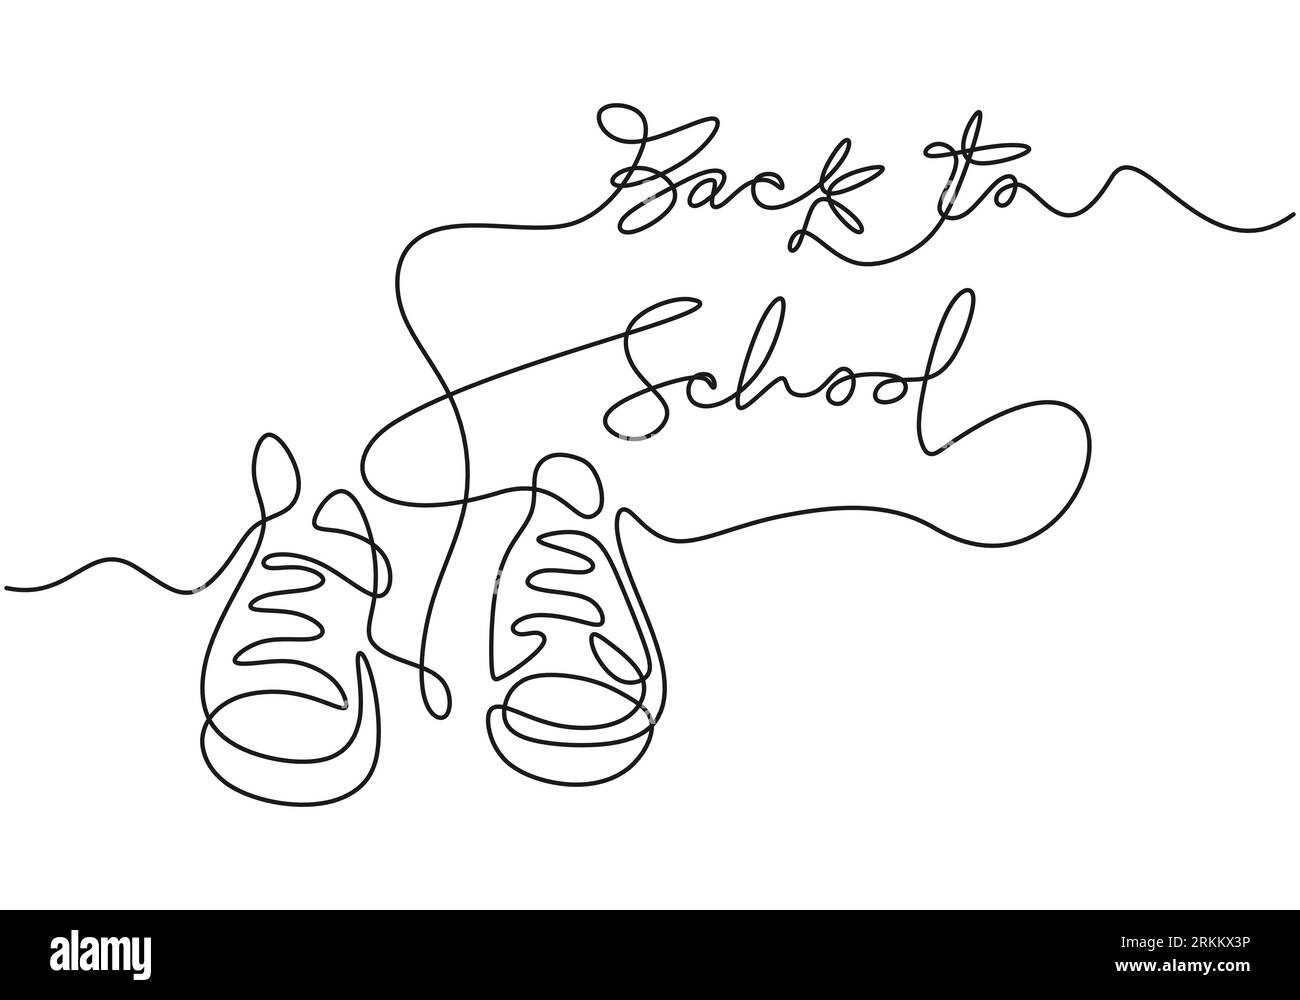 Continuous one line drawing of back to school handwritten words with school shoes isolated on white background. Stock Vector